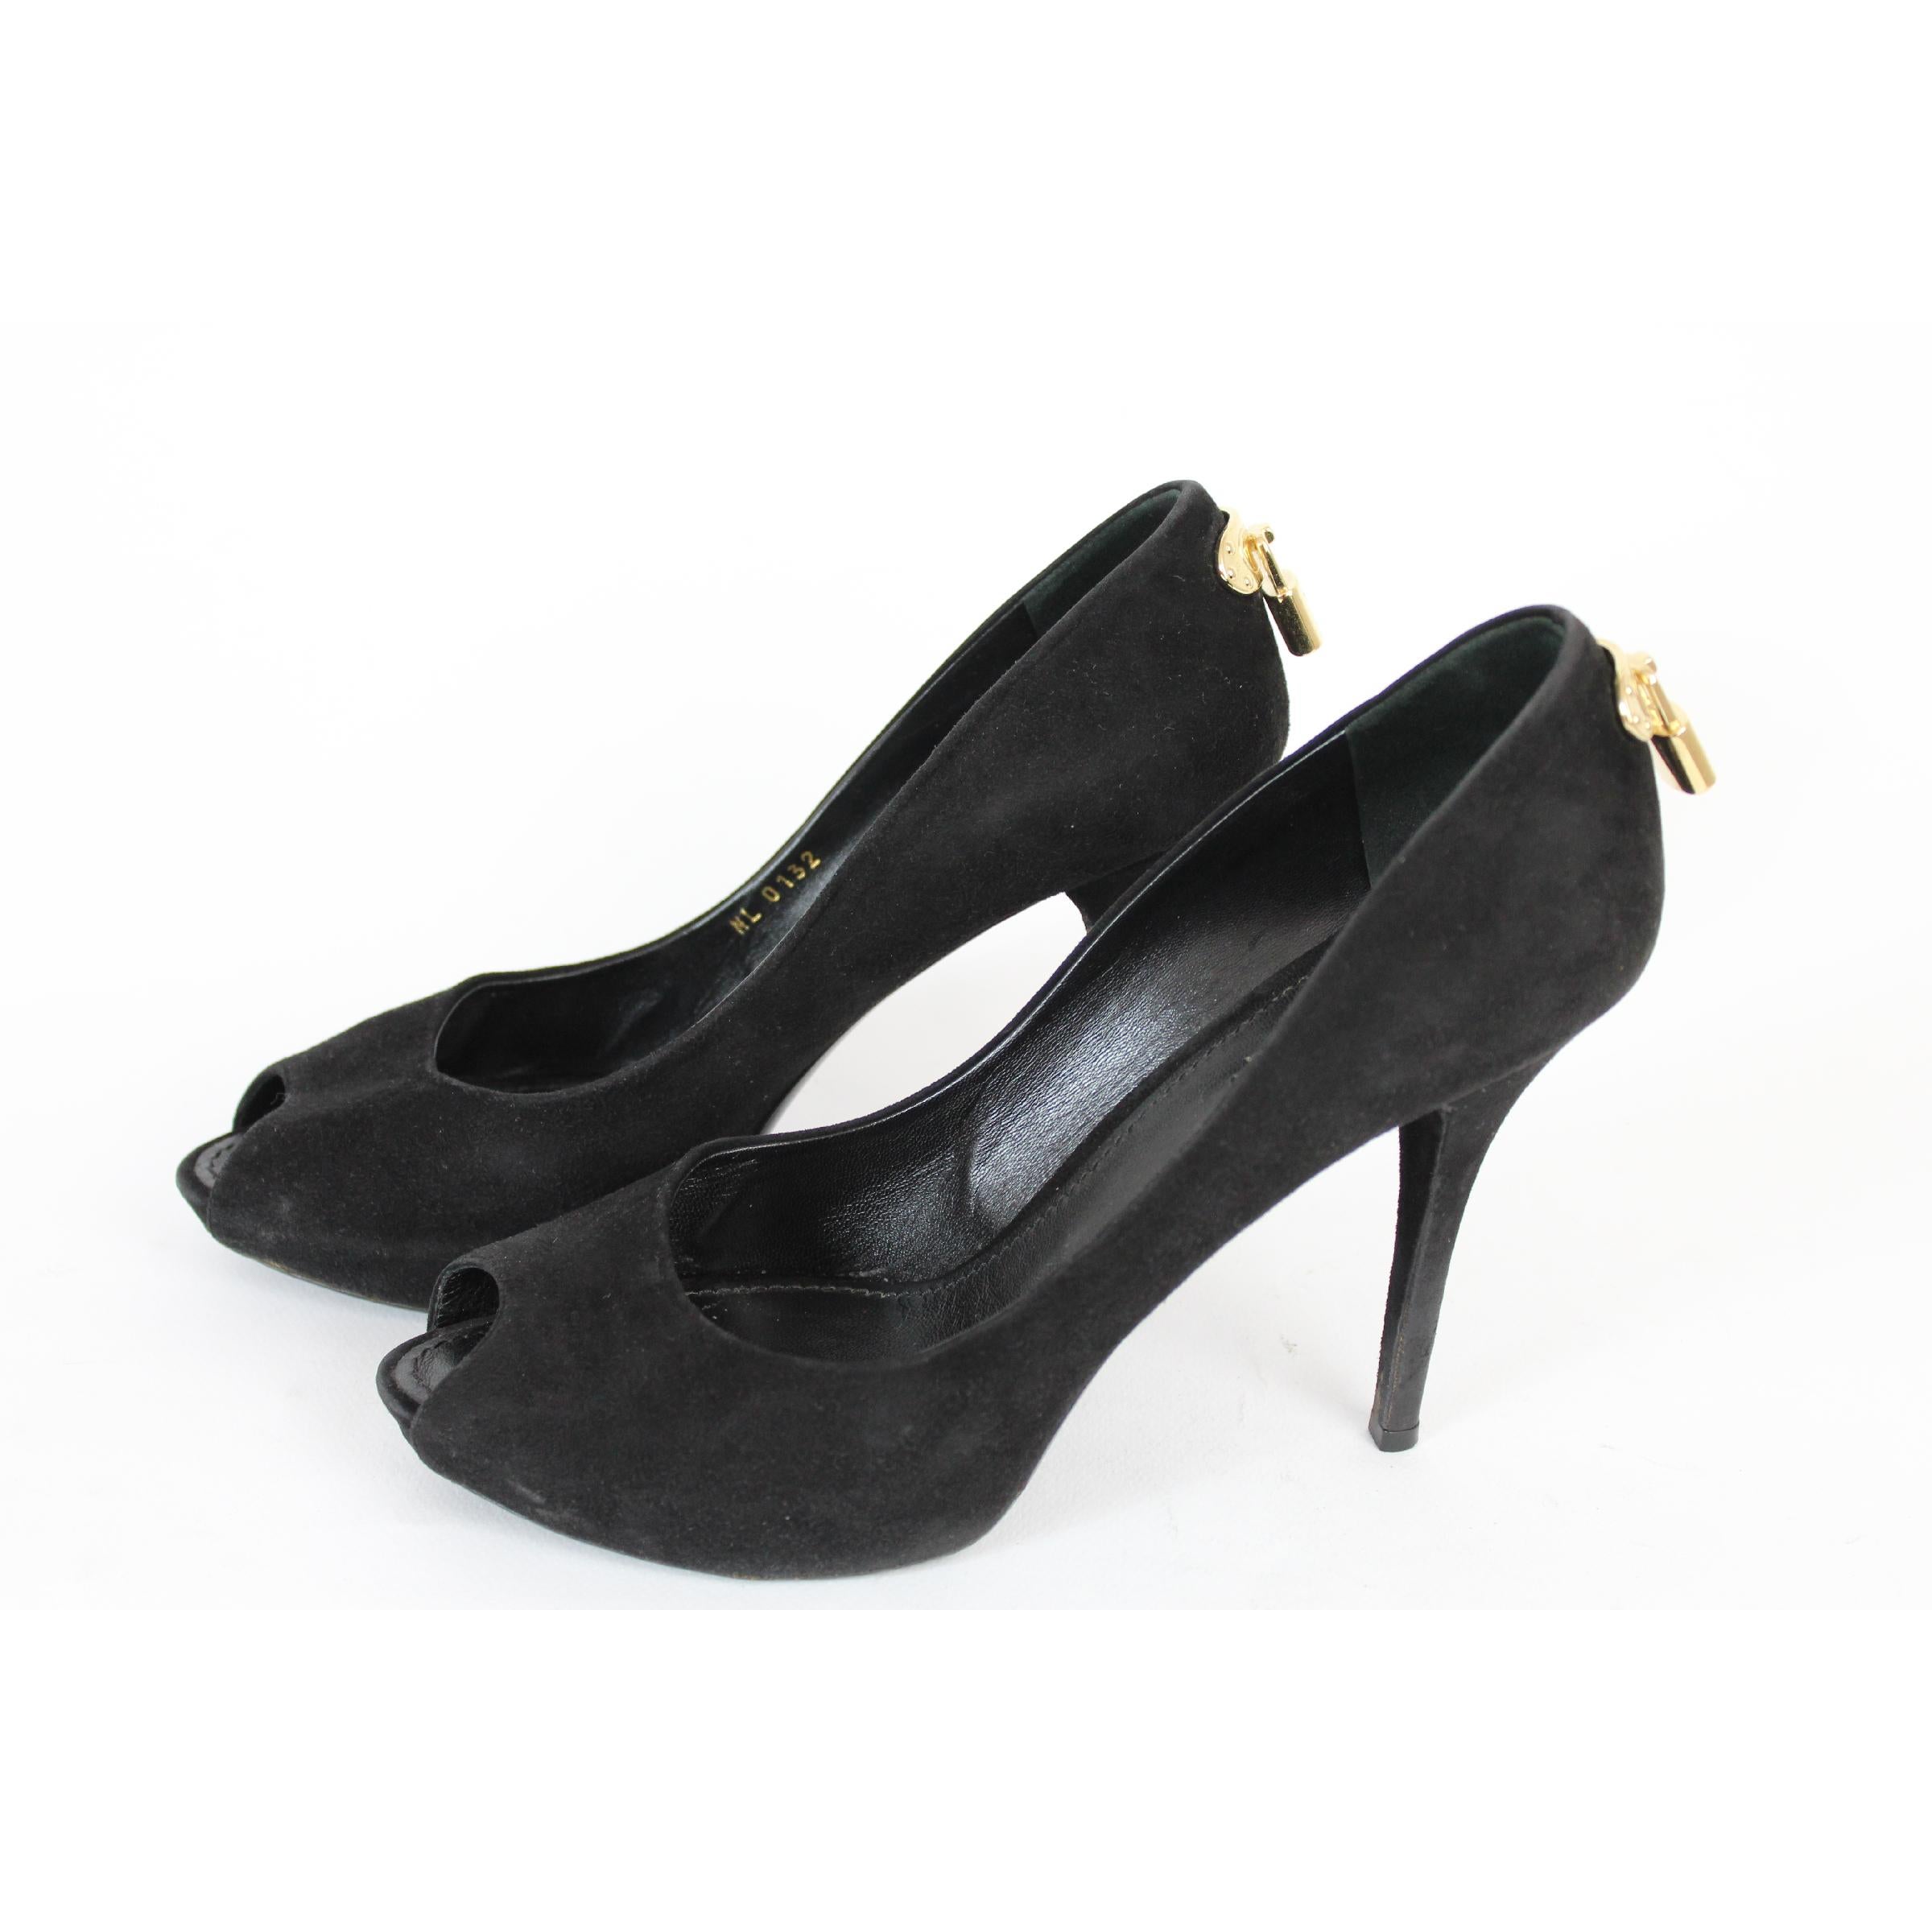 Women's Louis Vuitton Black Leather Suede Oh Really Heeled Shoes Peep-Poe Golden Padlock